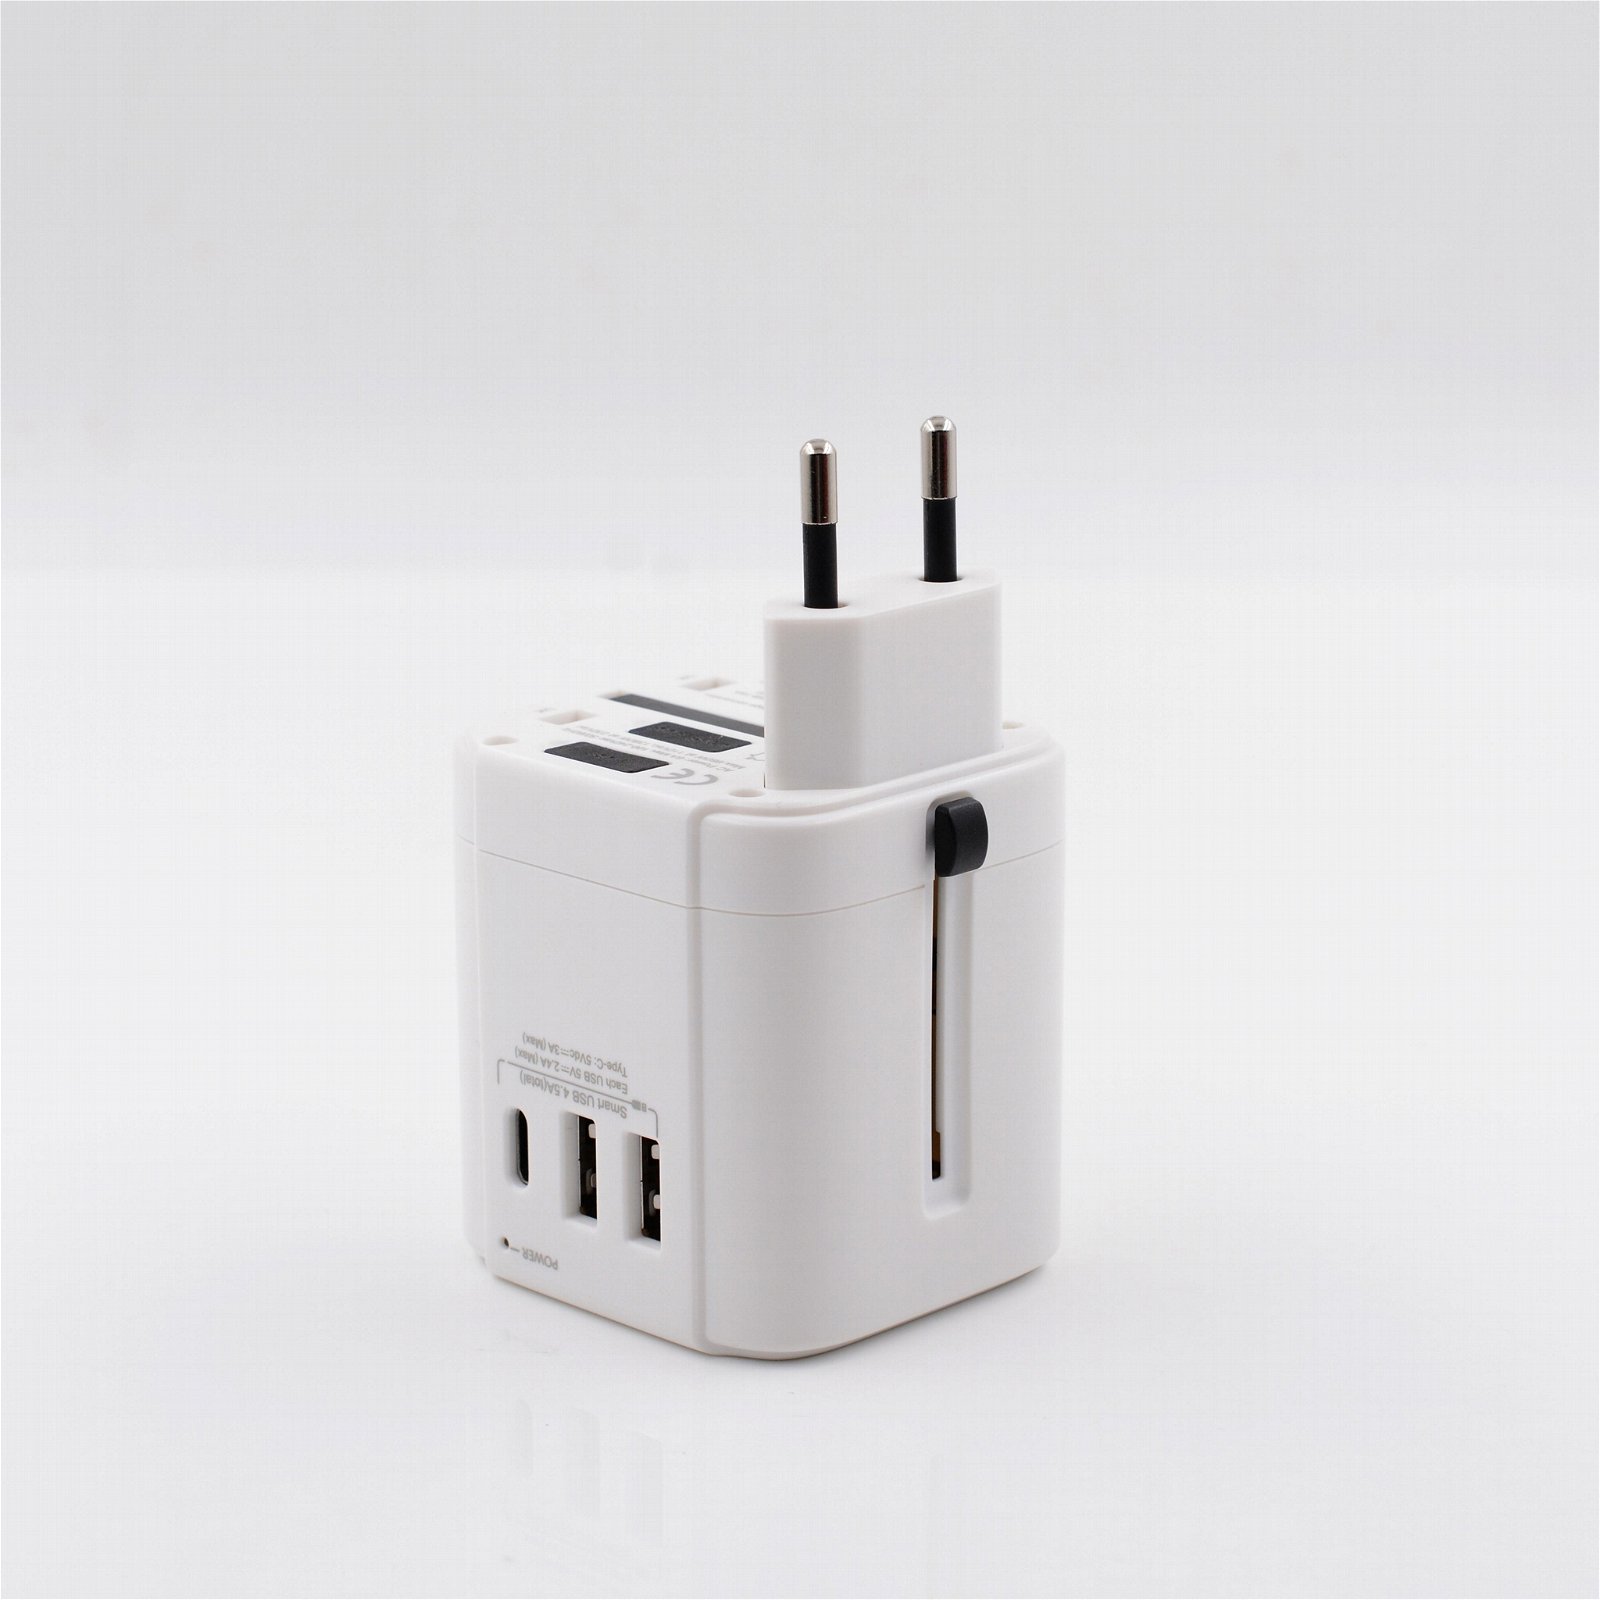 2019 gift promotion travel adapter with Taye C USB 4.5A plug adapter  2